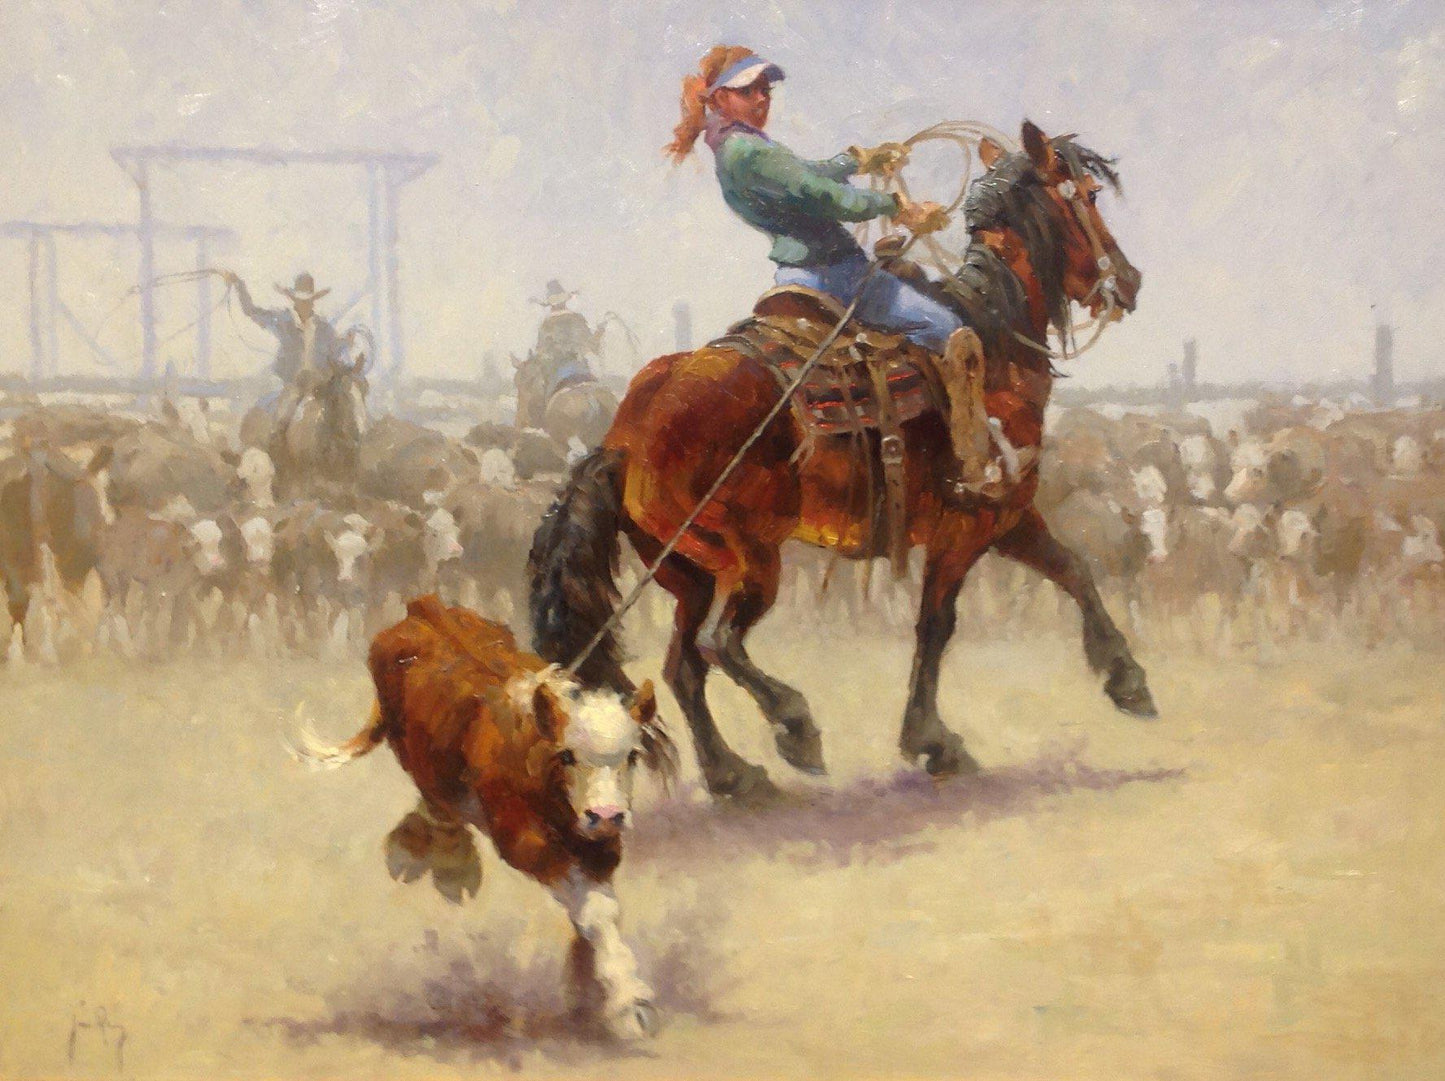 Oil painting of a cowgirl roping a calf by Durango artist Jim Rey